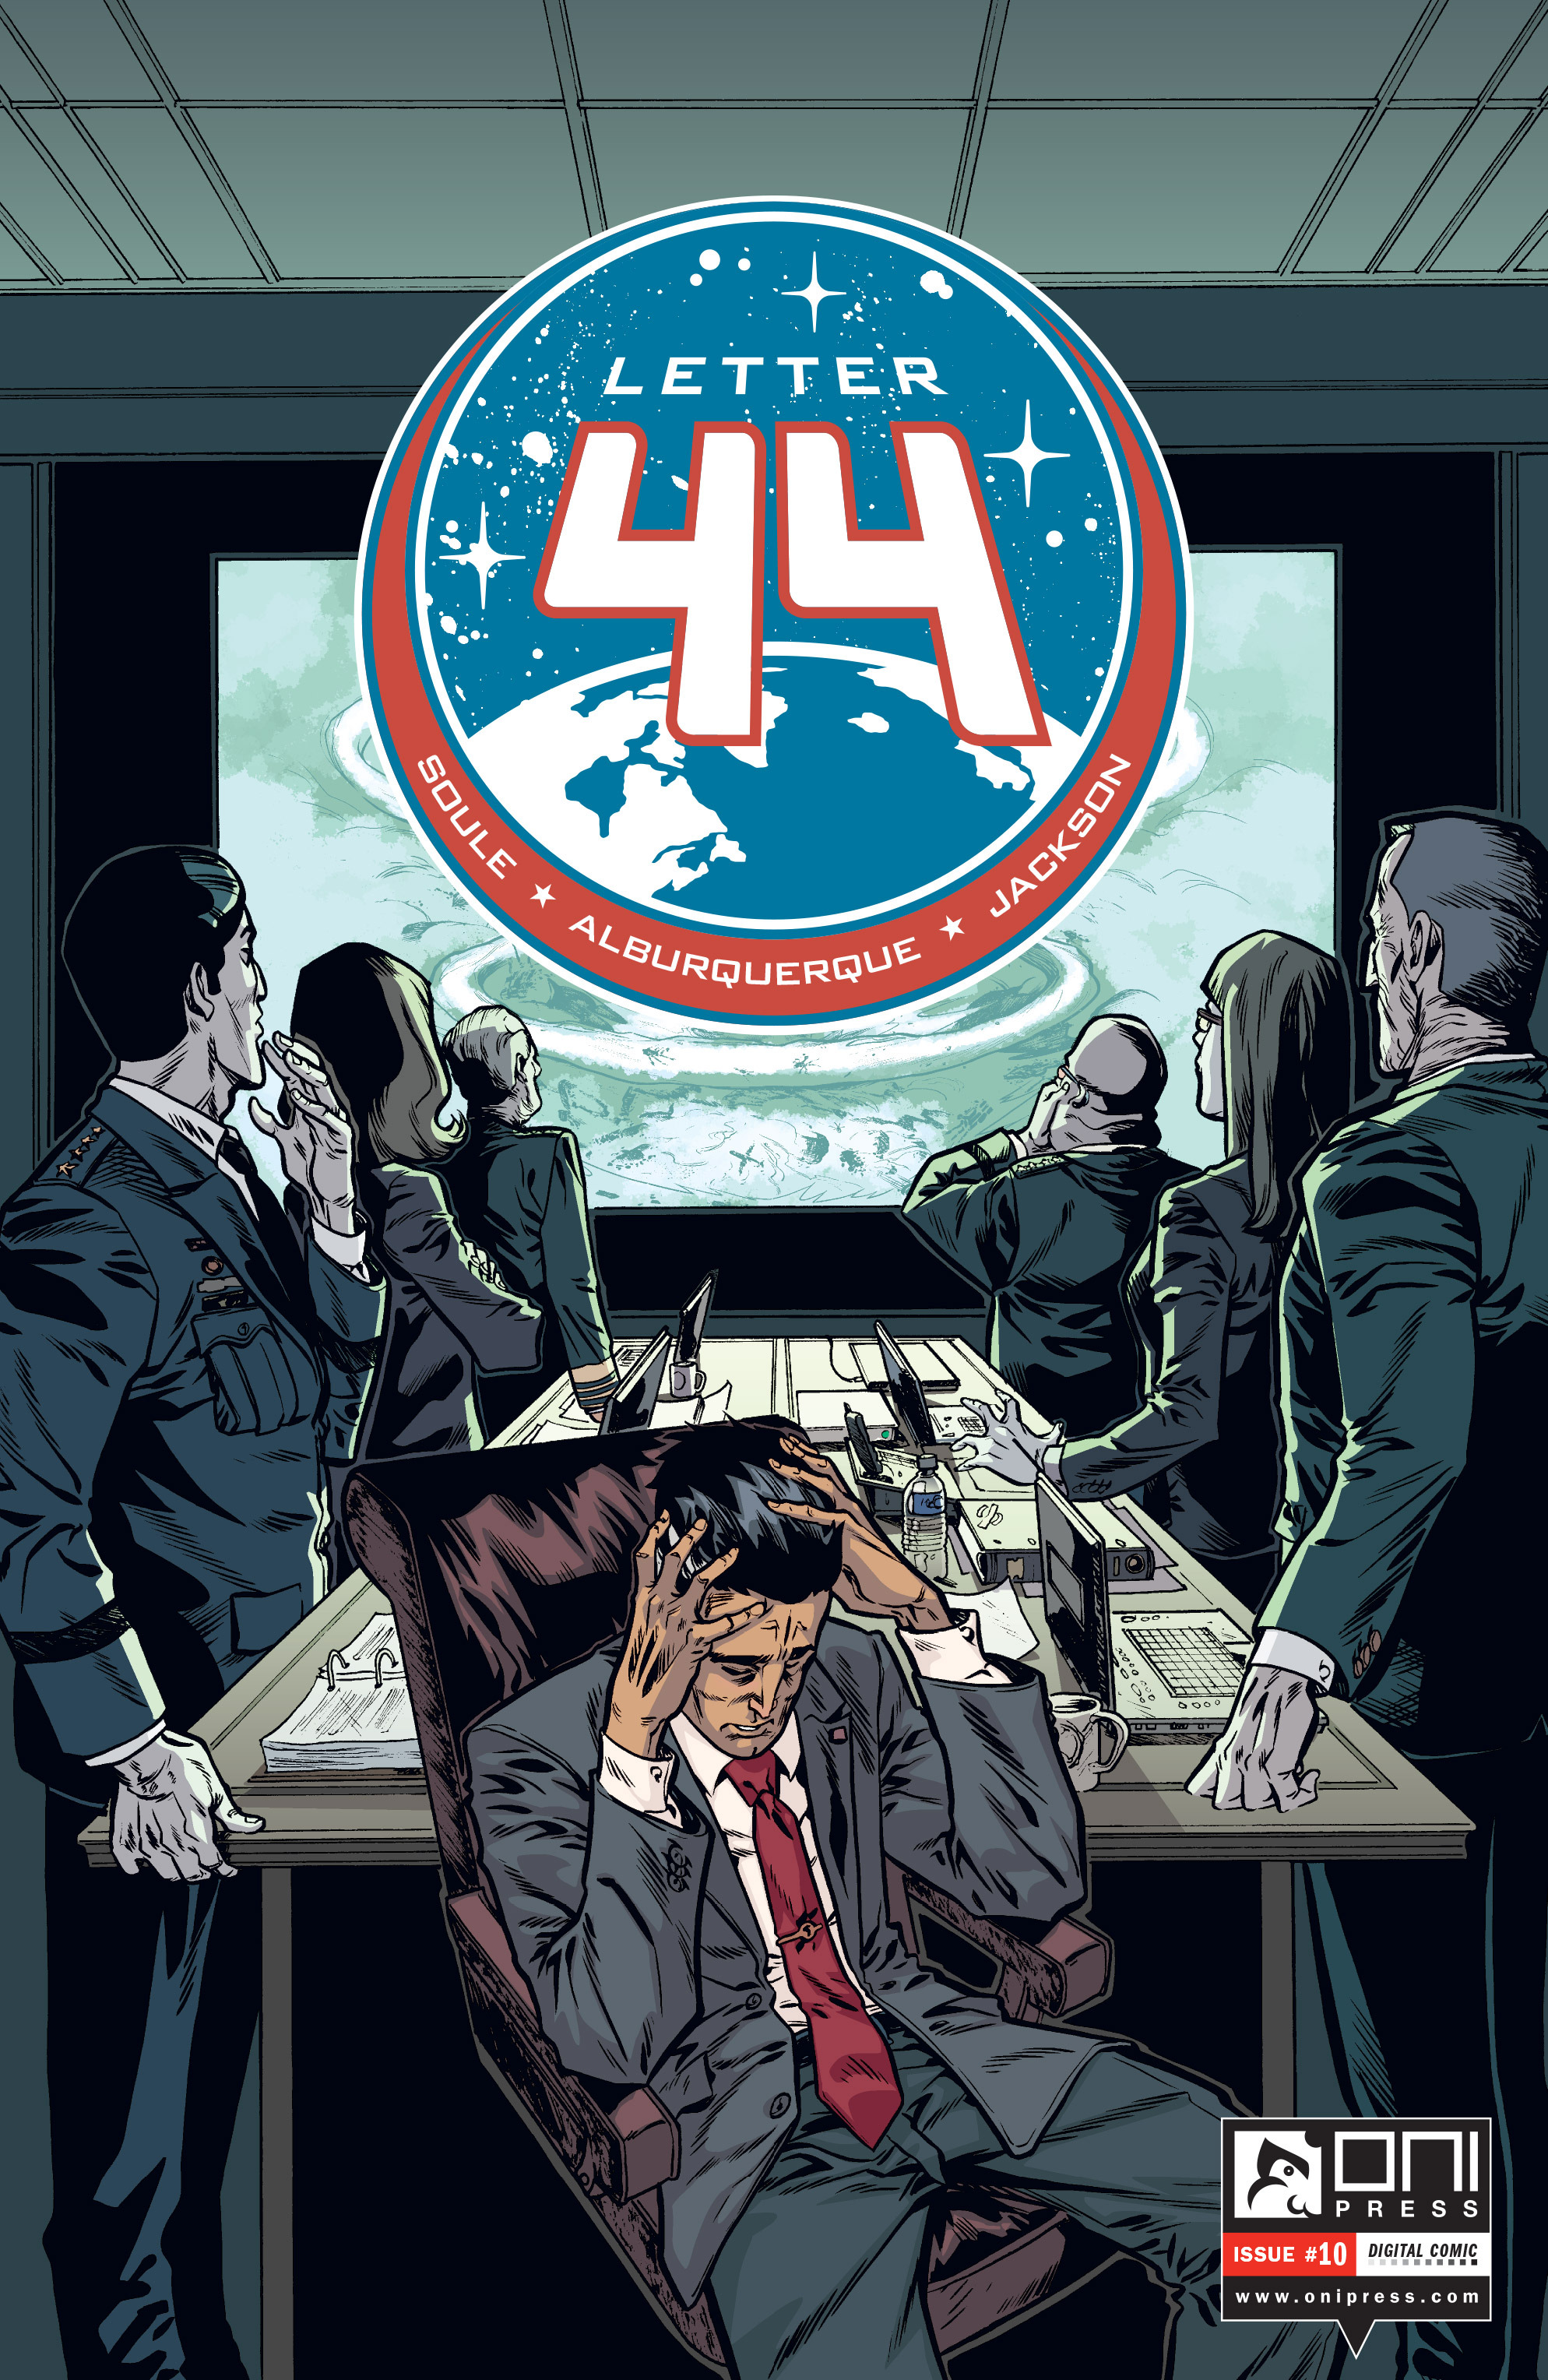 Read online Letter 44 comic -  Issue #10 - 1